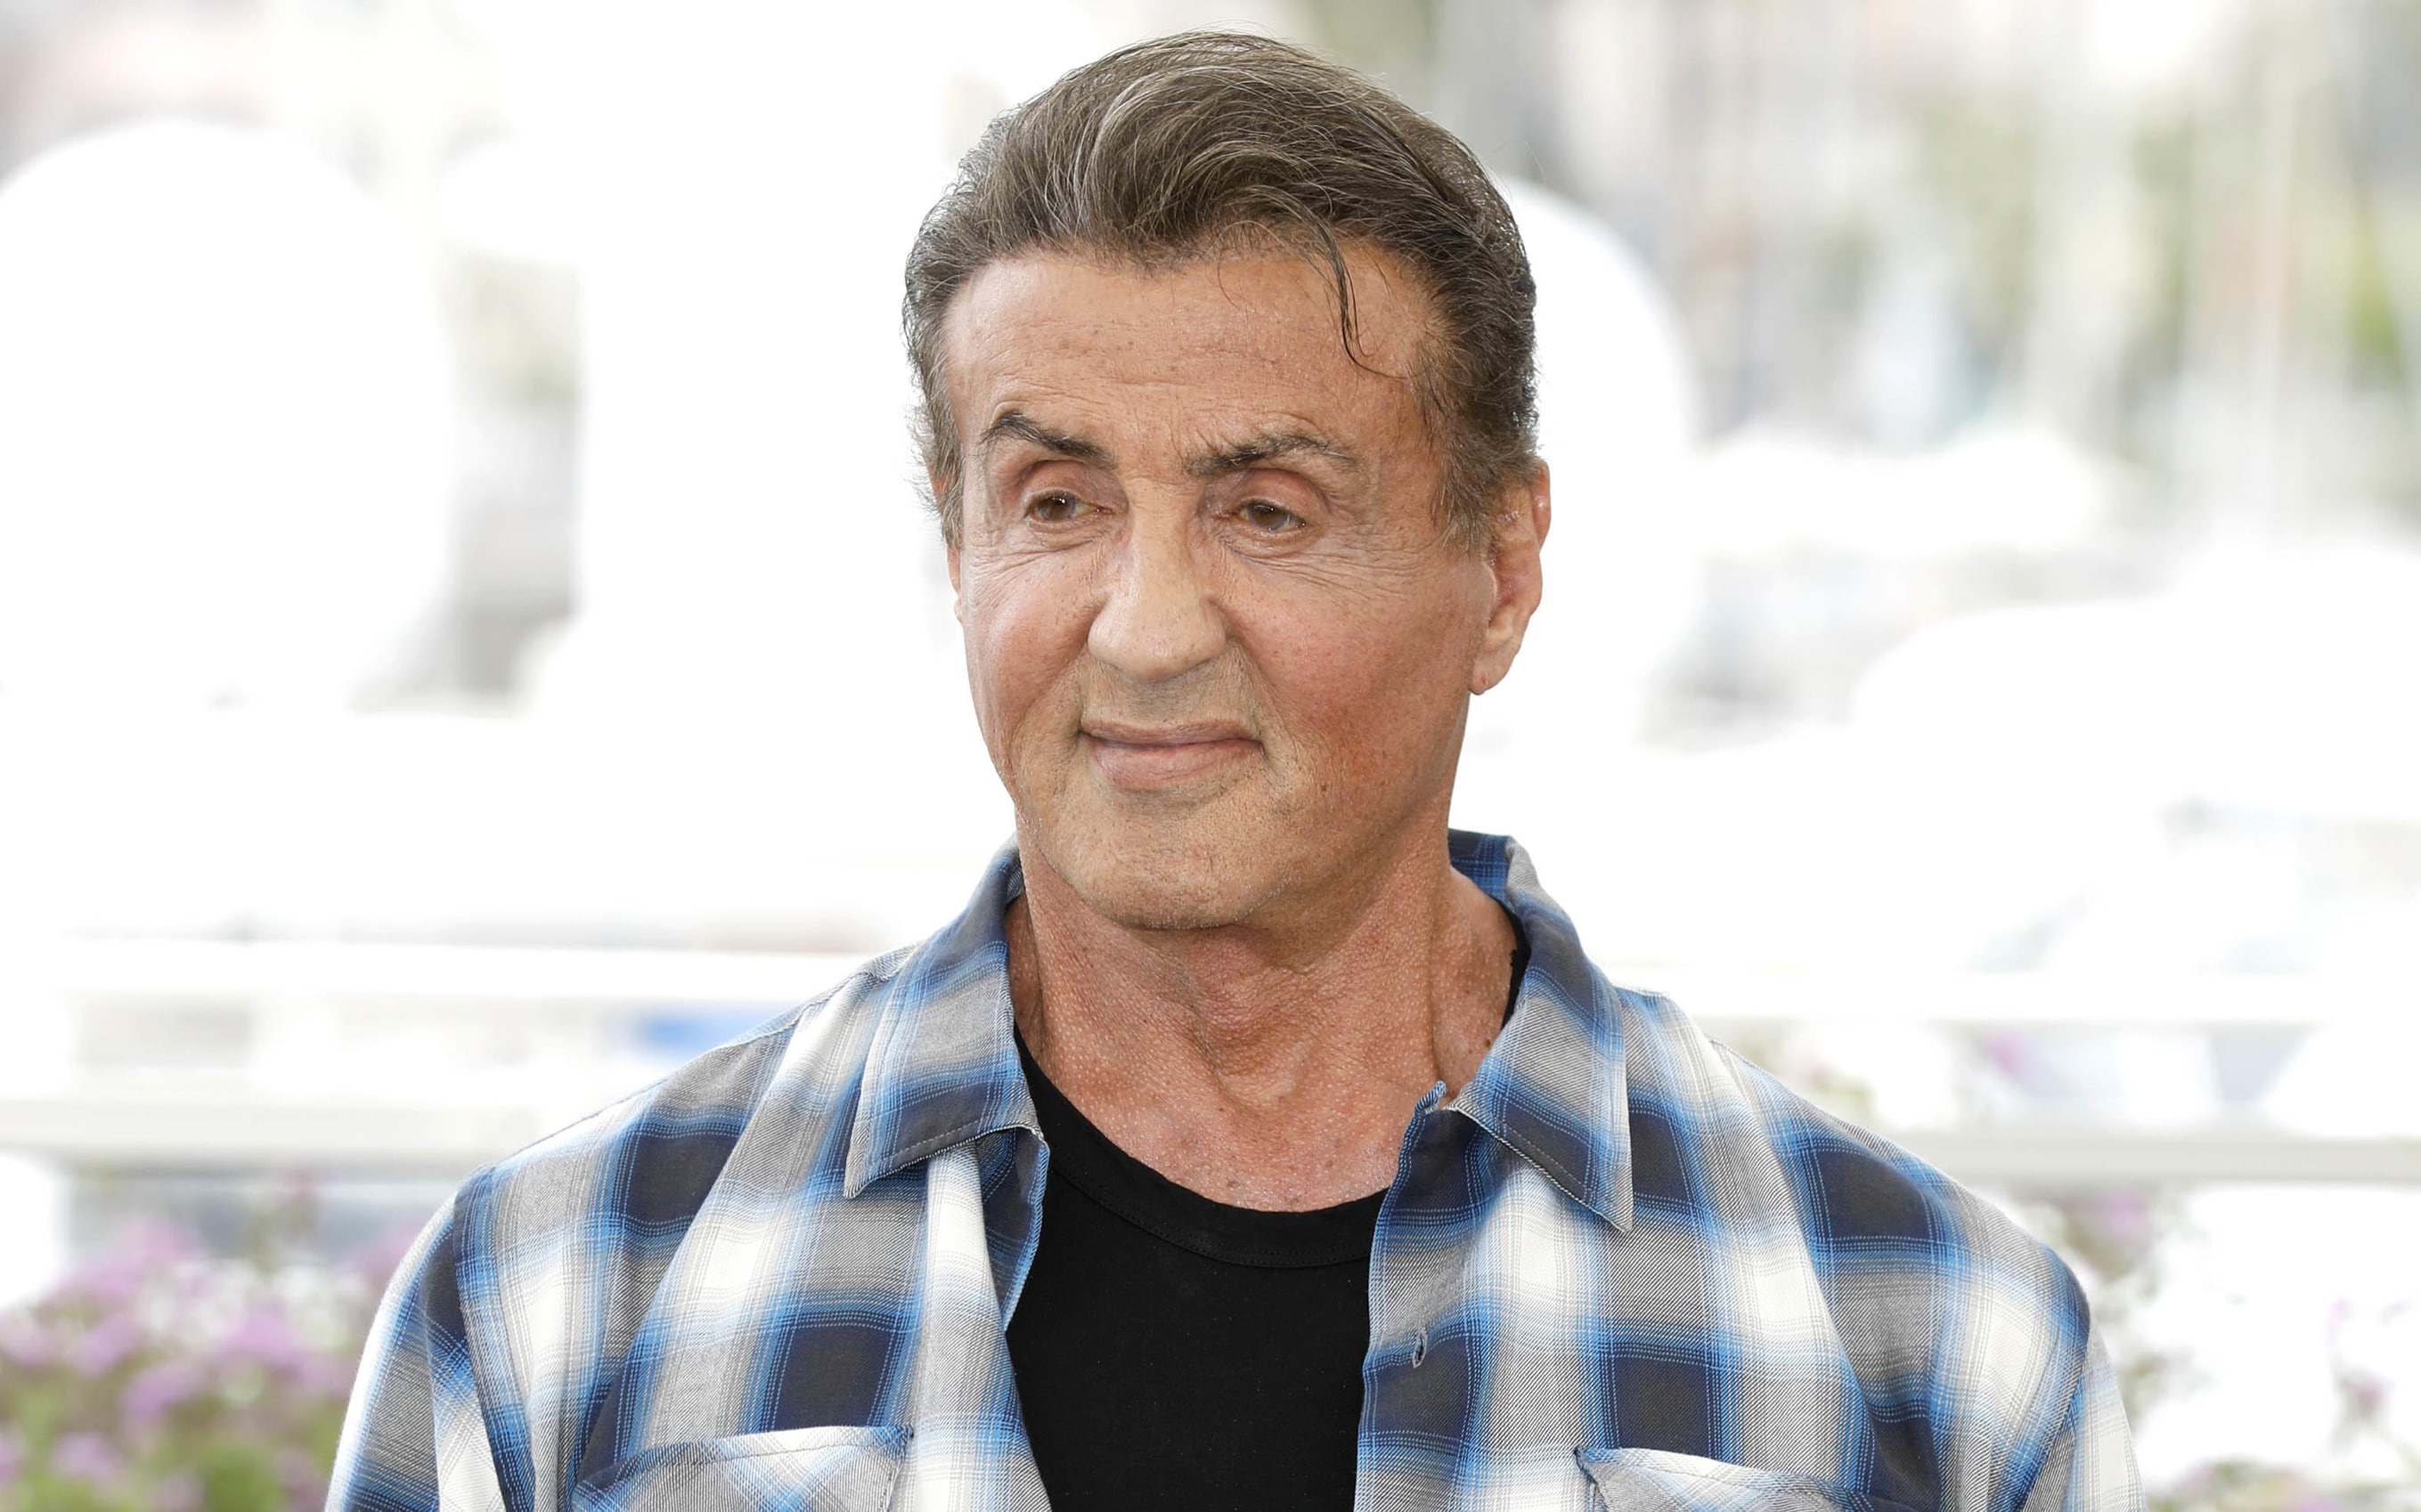 Kansas City will be the first TV series starring Sylvester Stallone